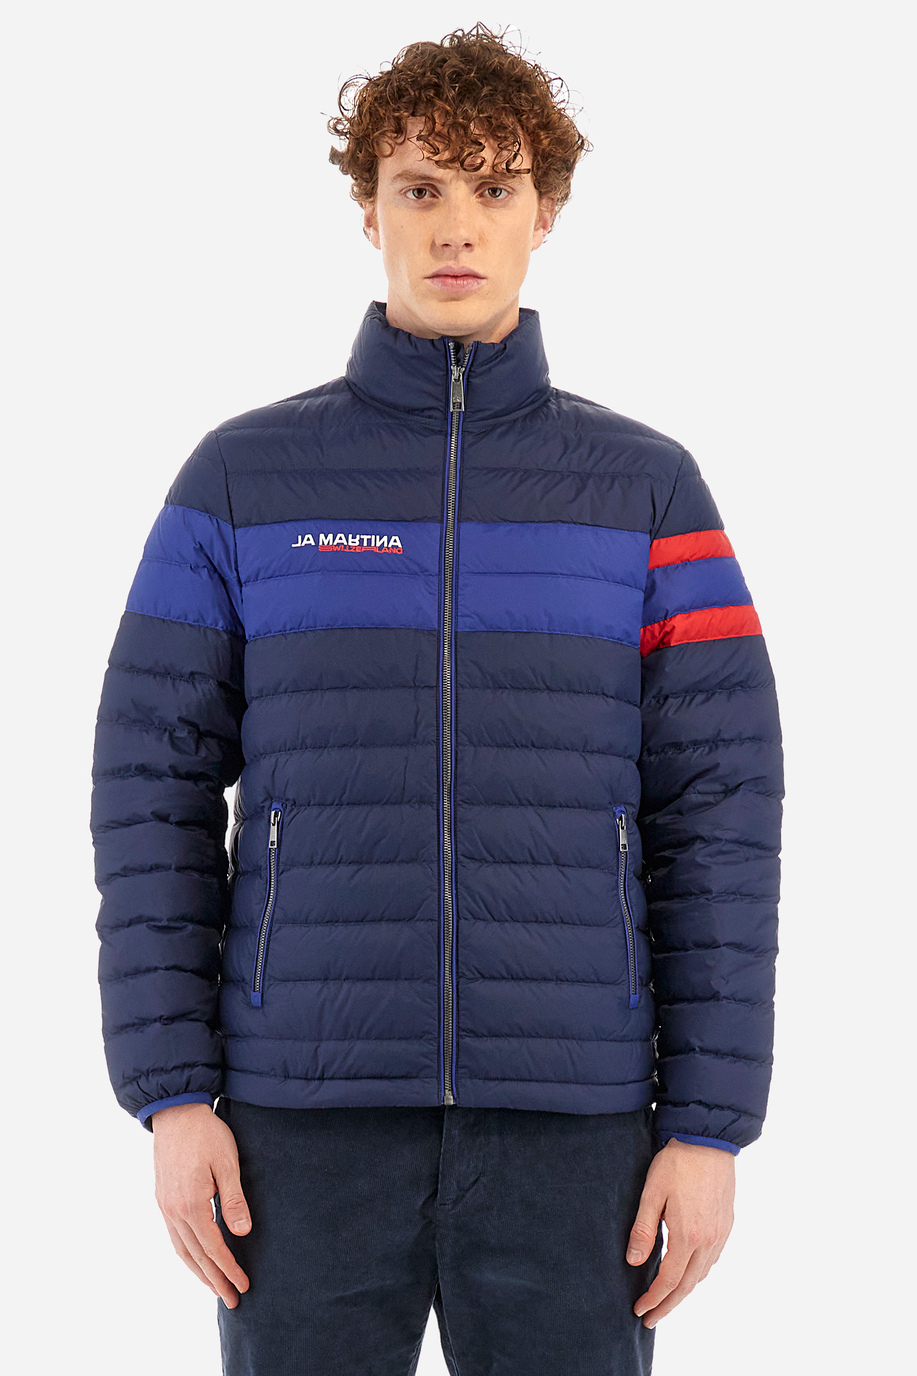 Man jacket in regular fit - Winefred - Snow Polo | La Martina - Official Online Shop